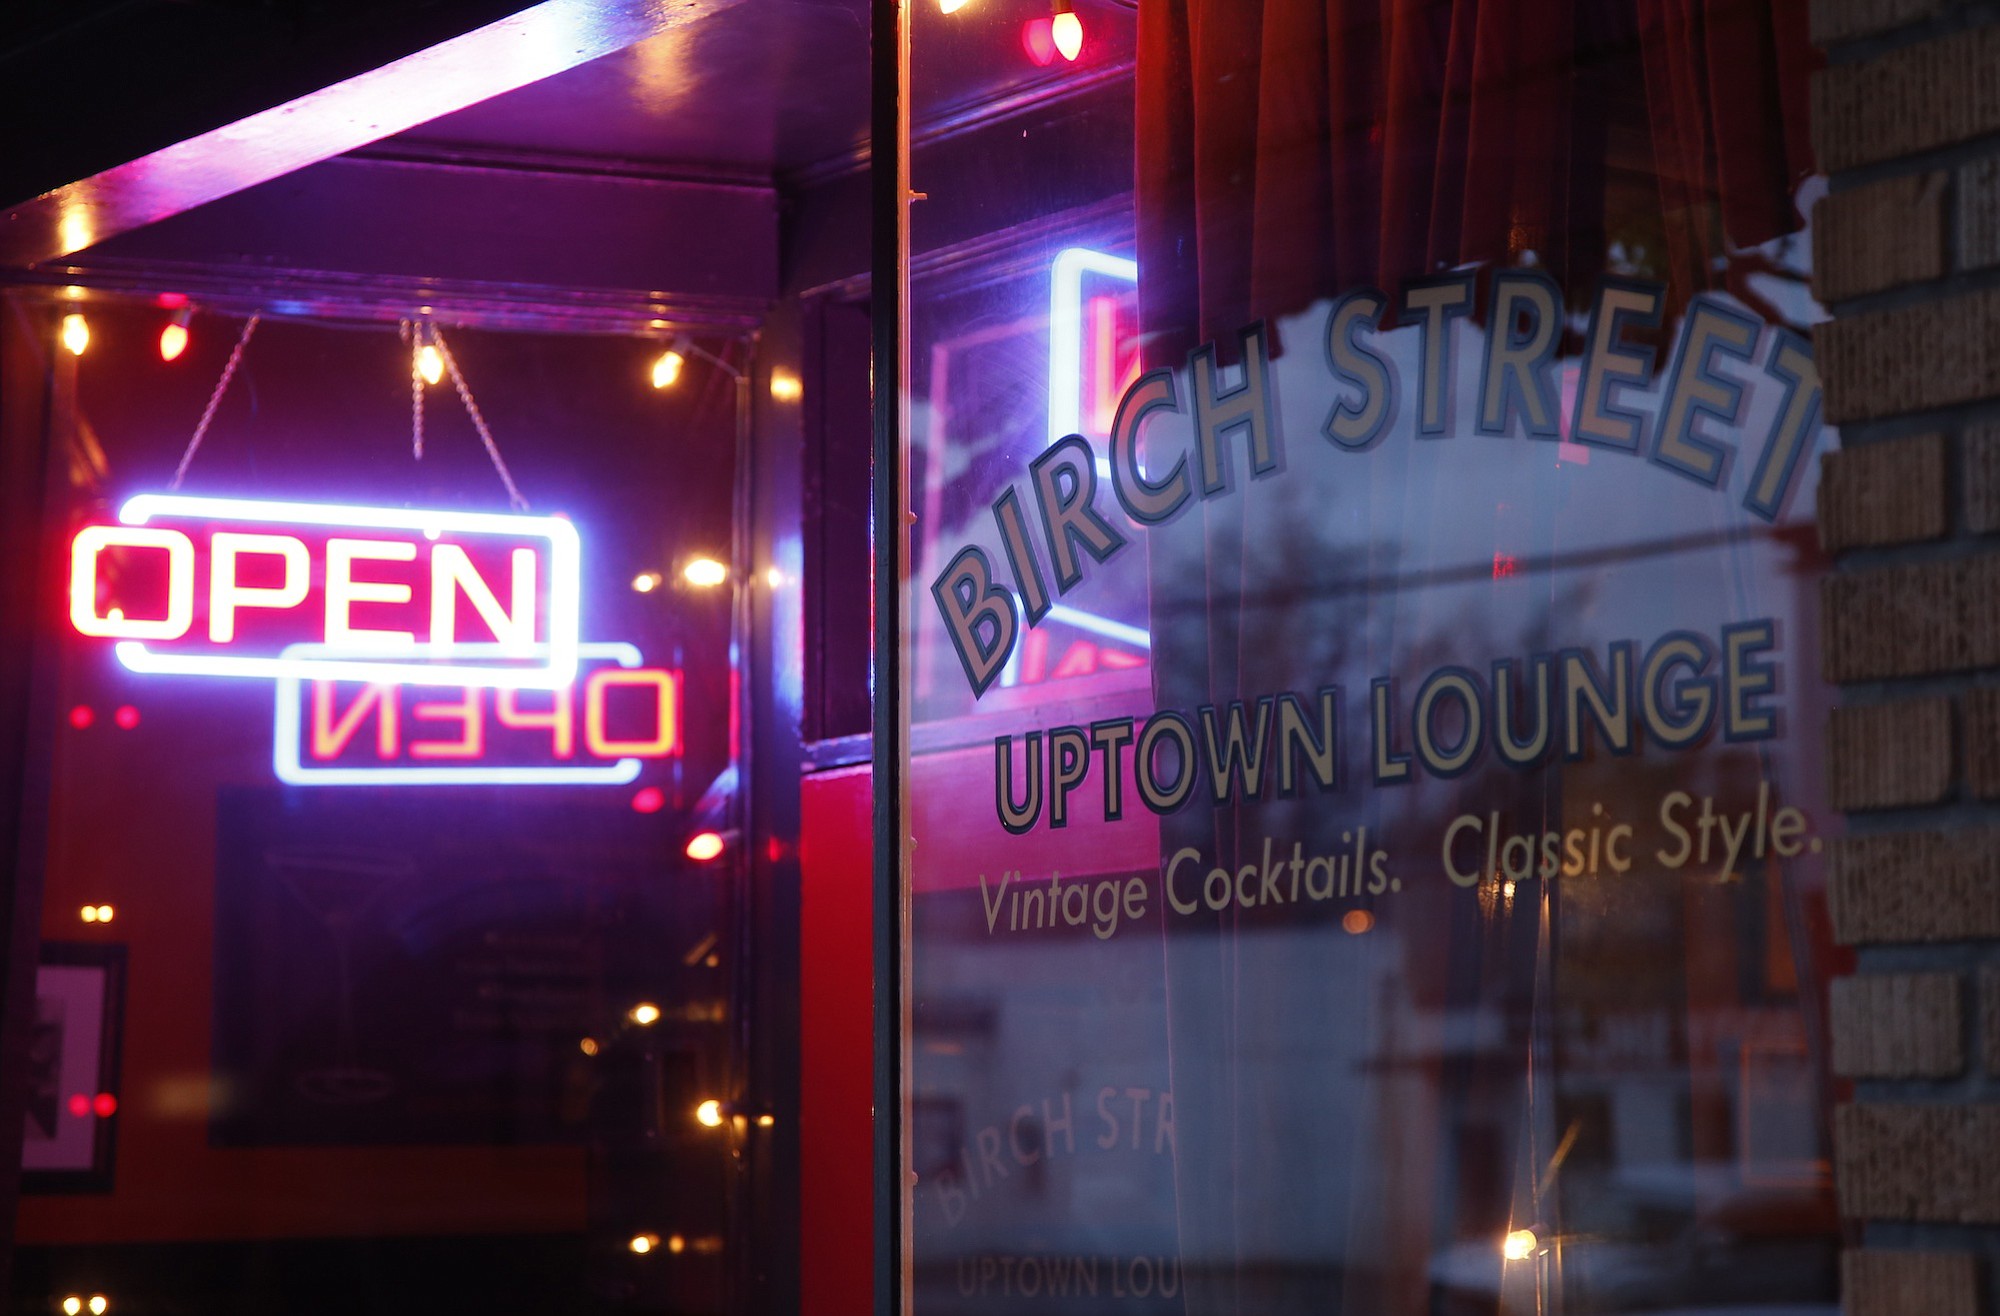 Birch Street Uptown Lounge is one of several downtown Camas nightspots. Owner Kevin Taylor said he welcomes the growing competition along Fourth Avenue.